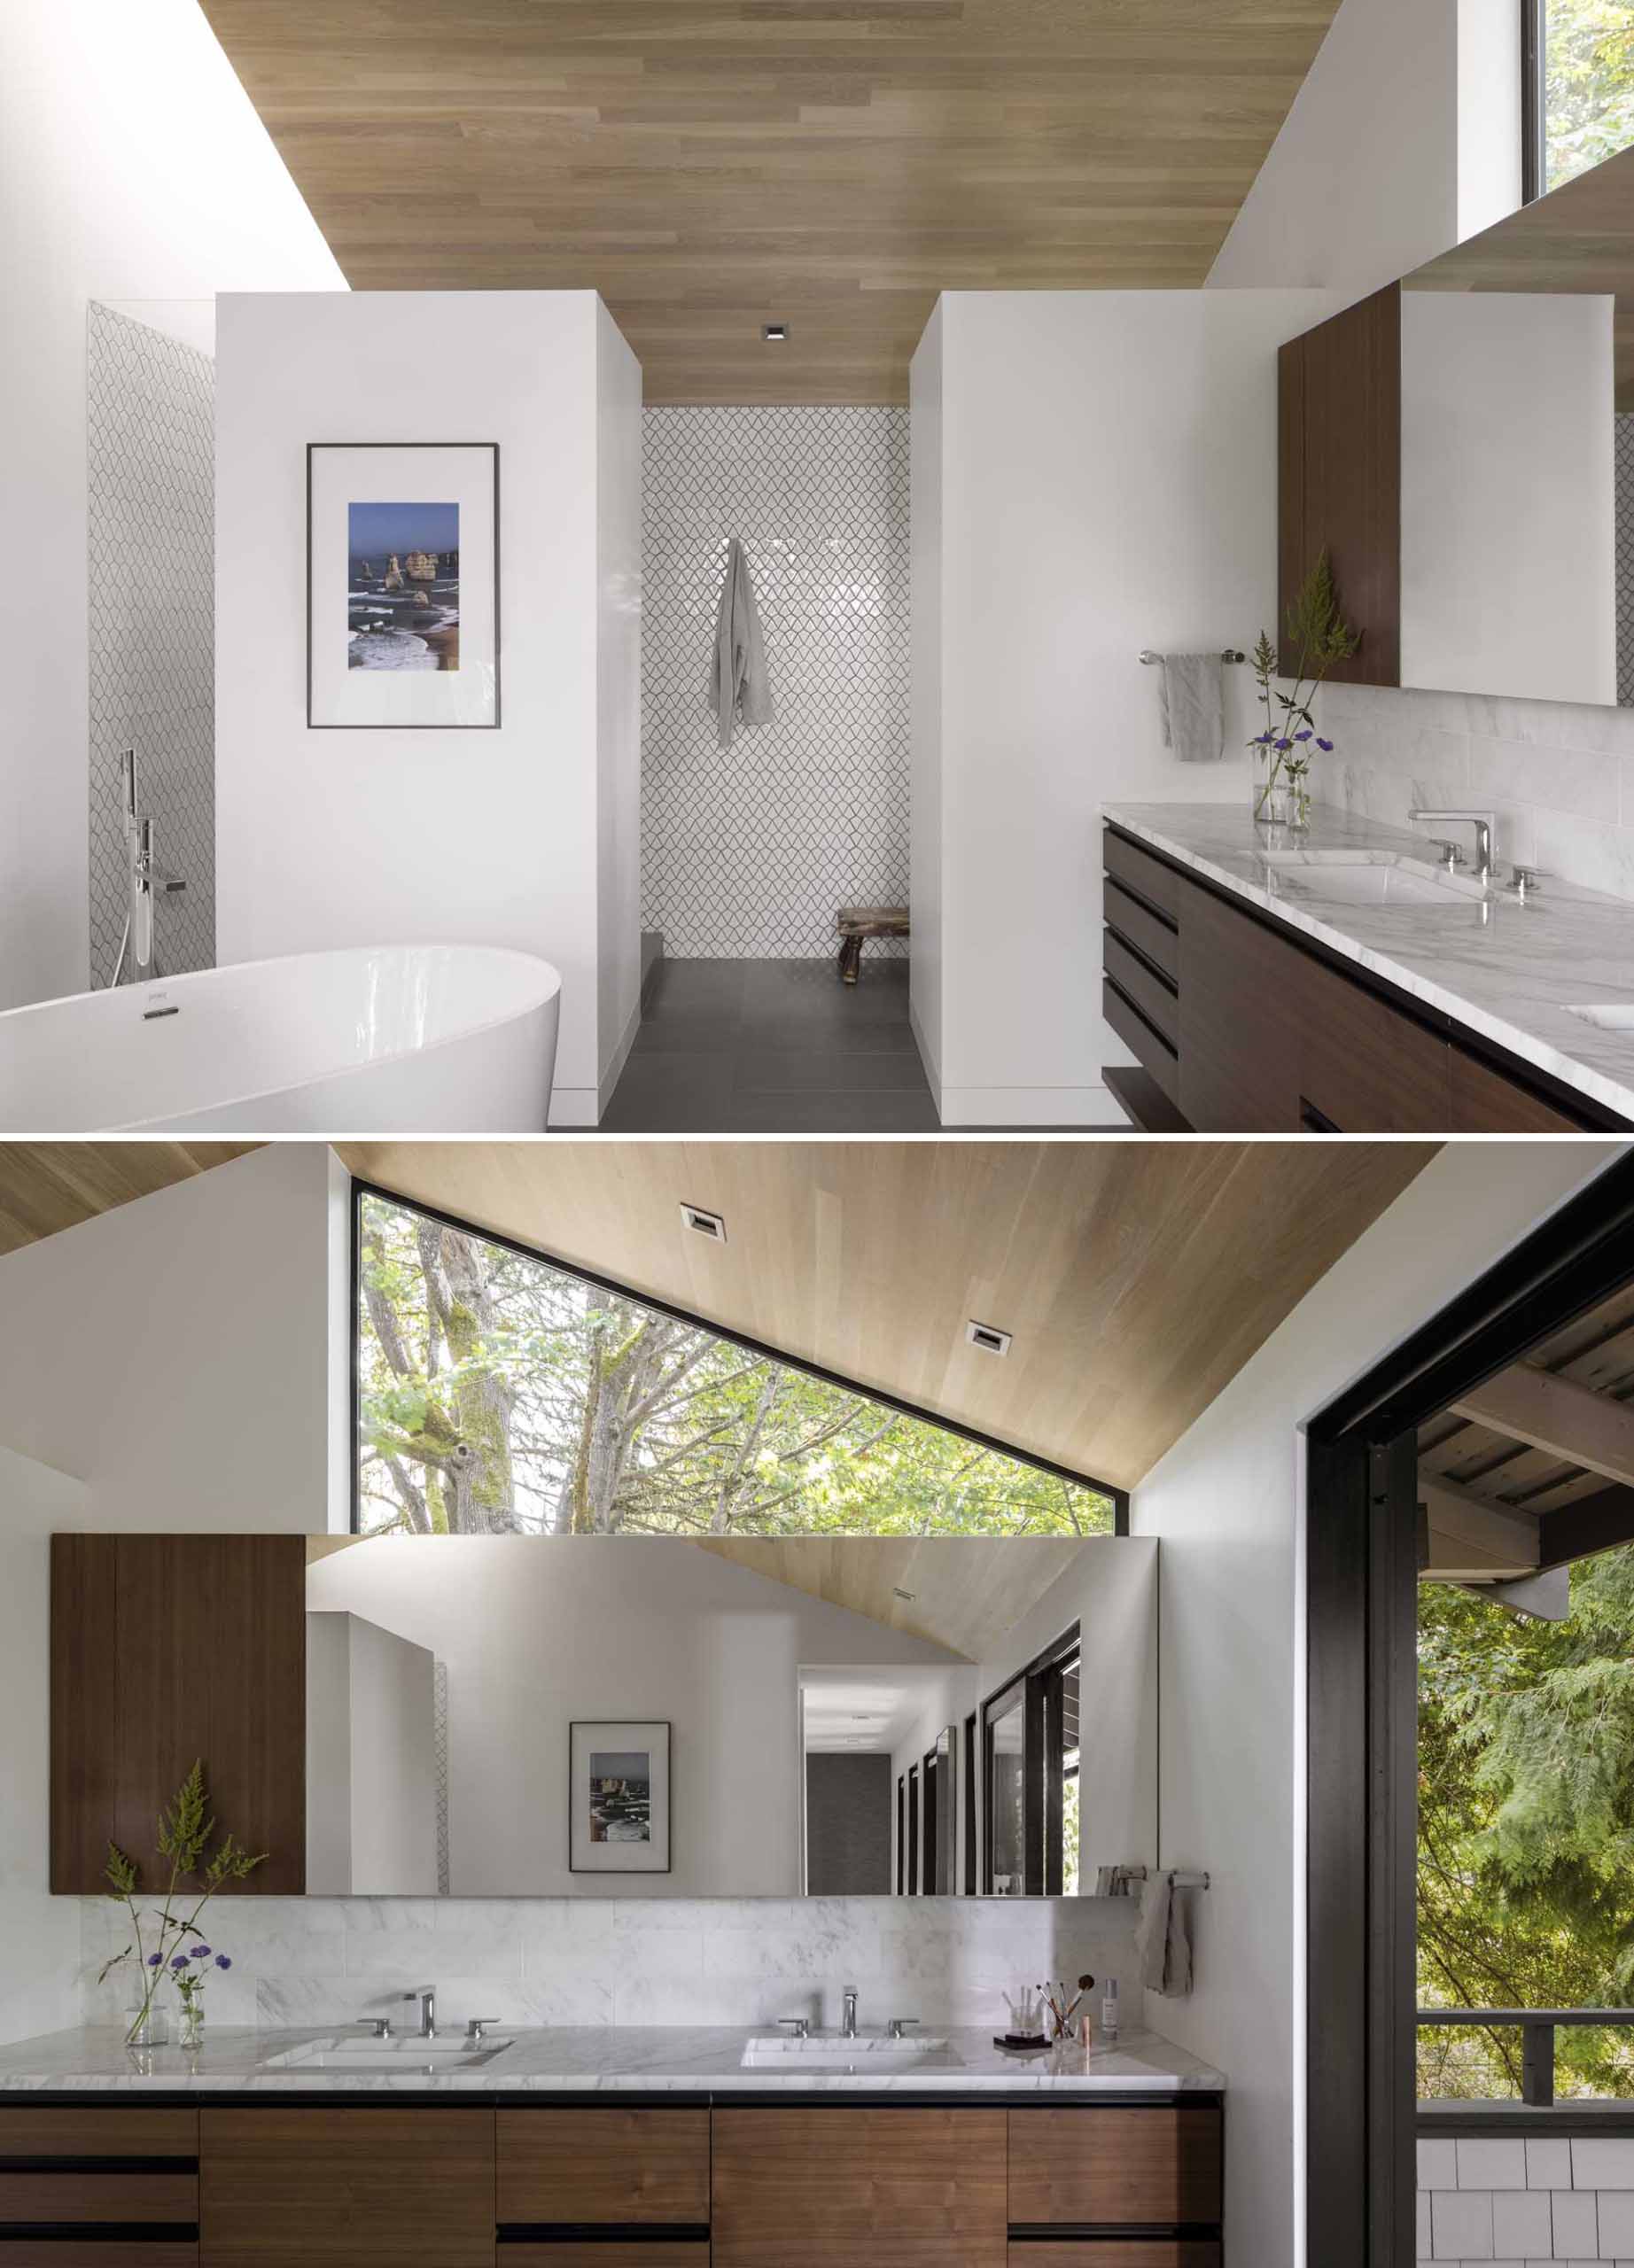 A remodeled bathroom has free-standing tub and south-facing vanity for two that are separated by a pair of part-height walls that allow light to spill over into a private walk-in shower area that is topped by a skylight and toilet room.